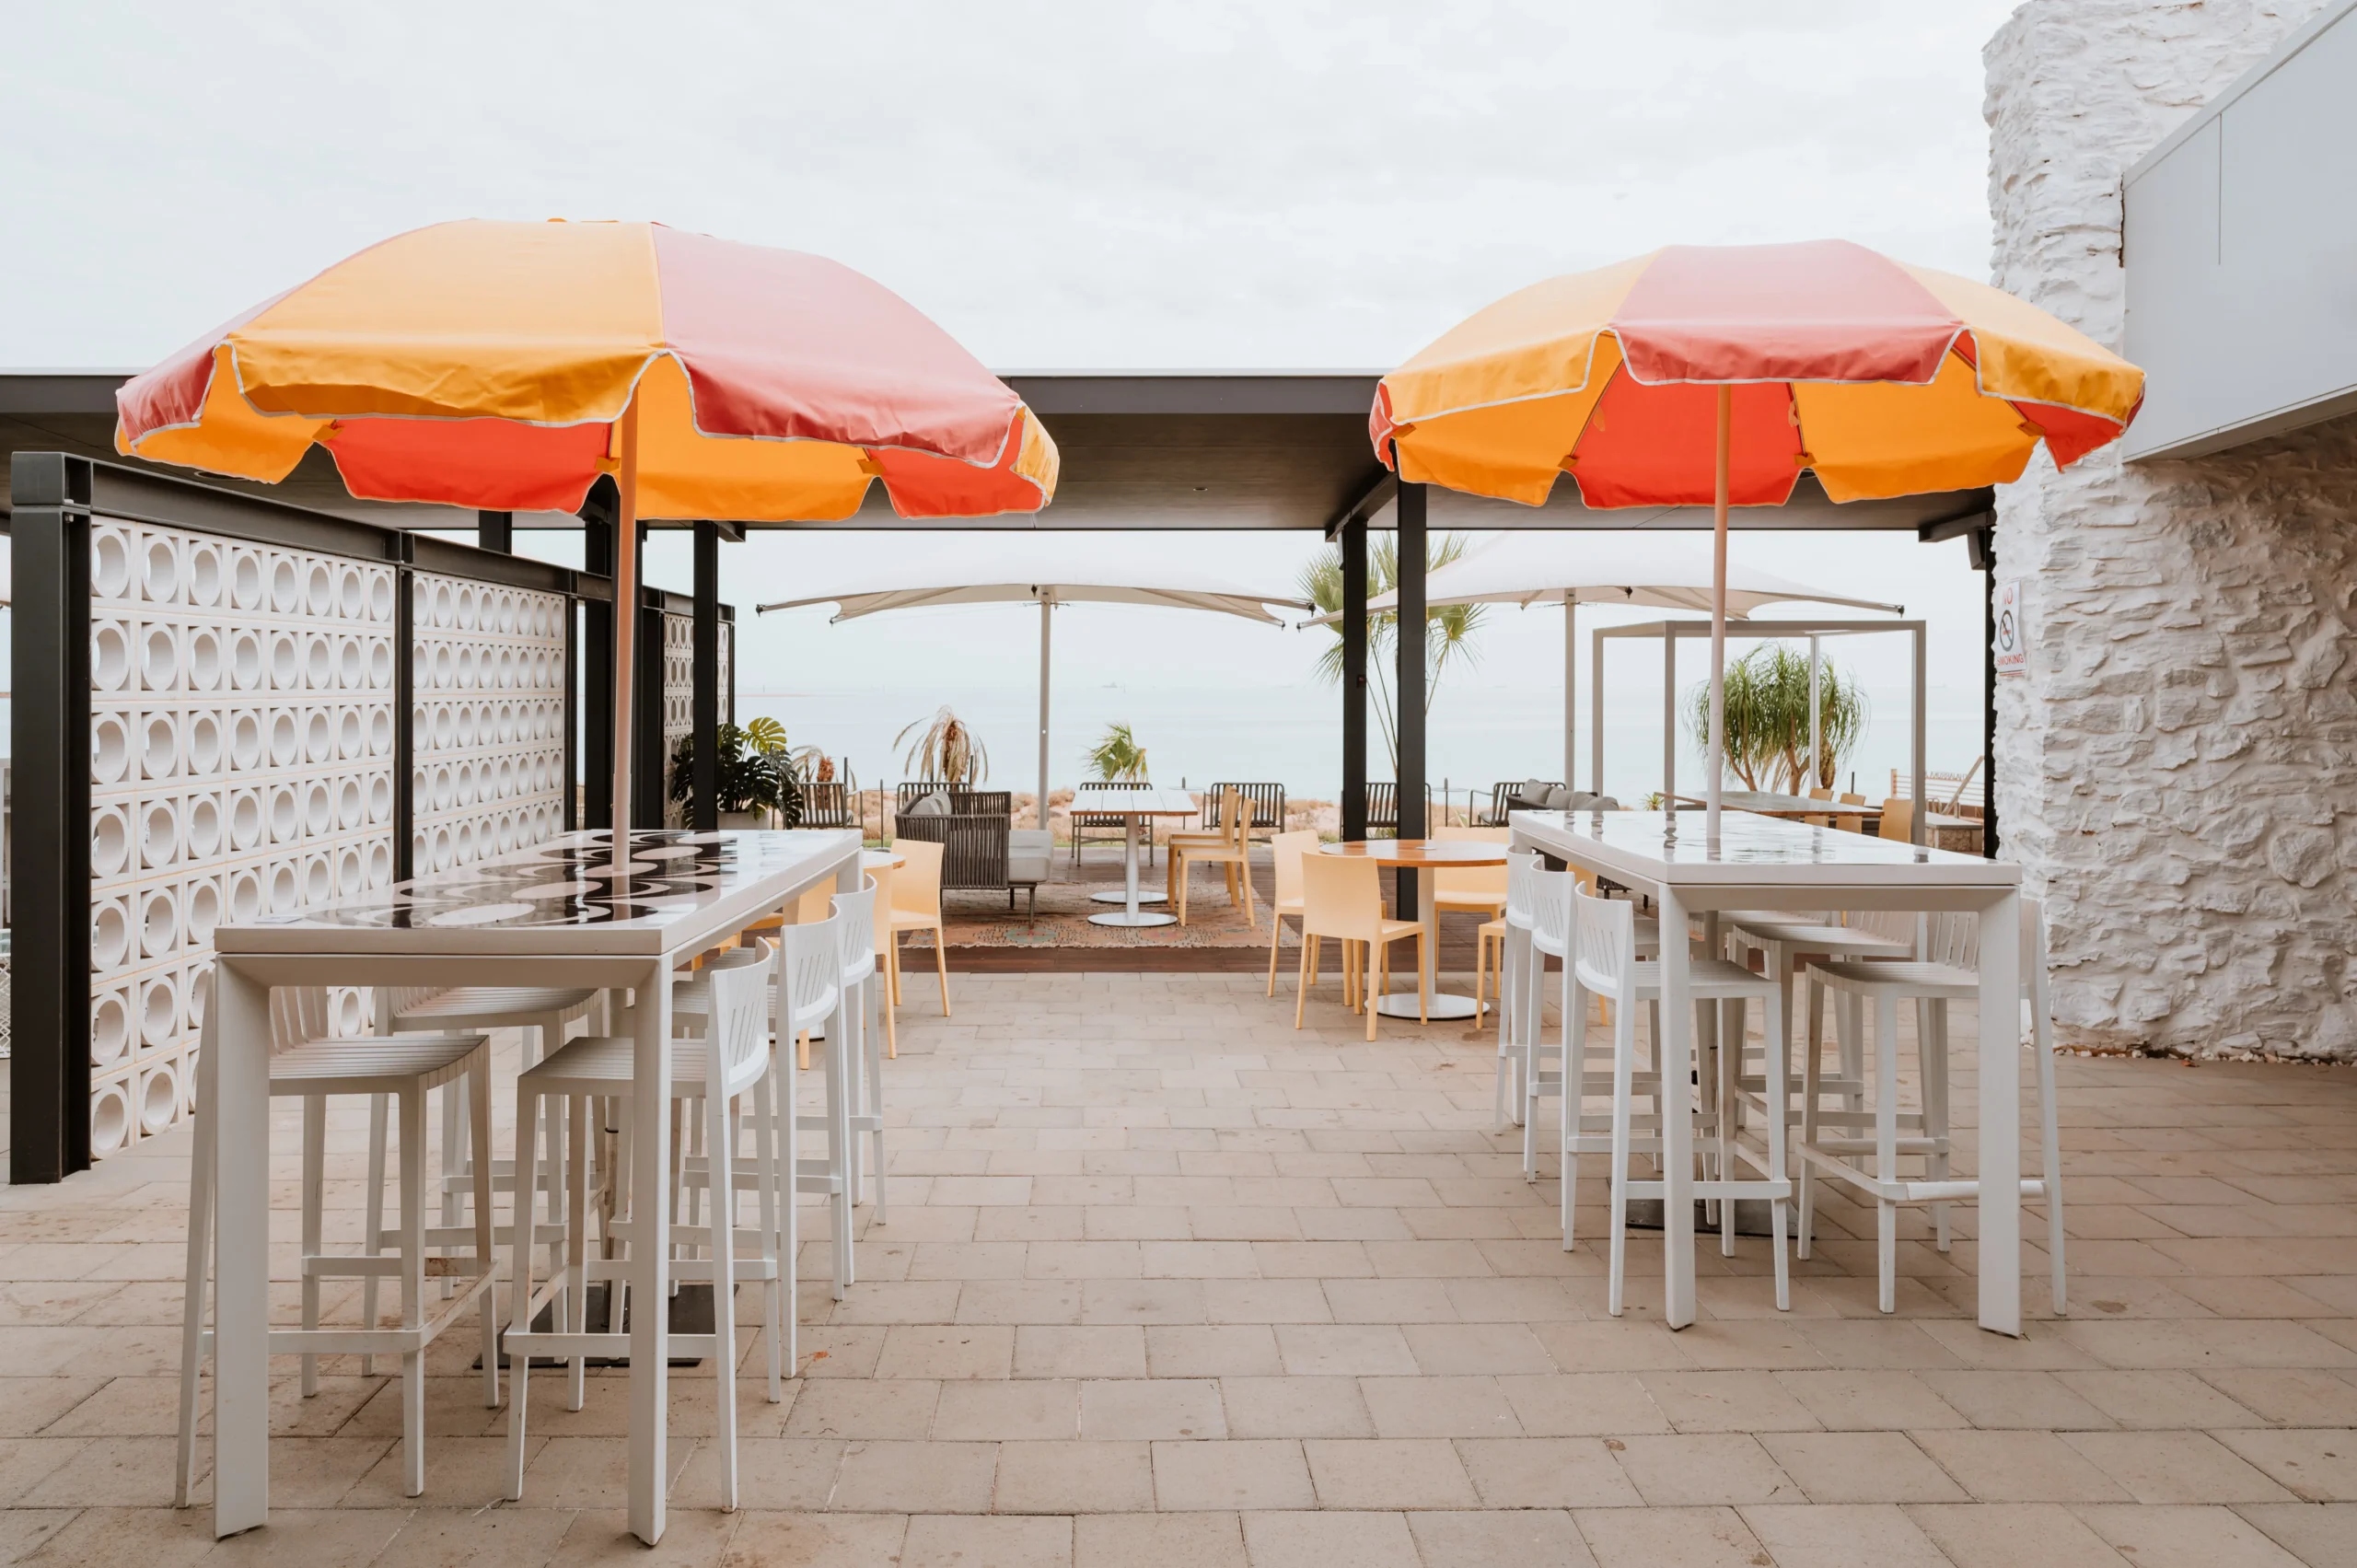 Photo of the exterior dining area at Rays Port Hedland with beach umbrellas and the ocean in the background